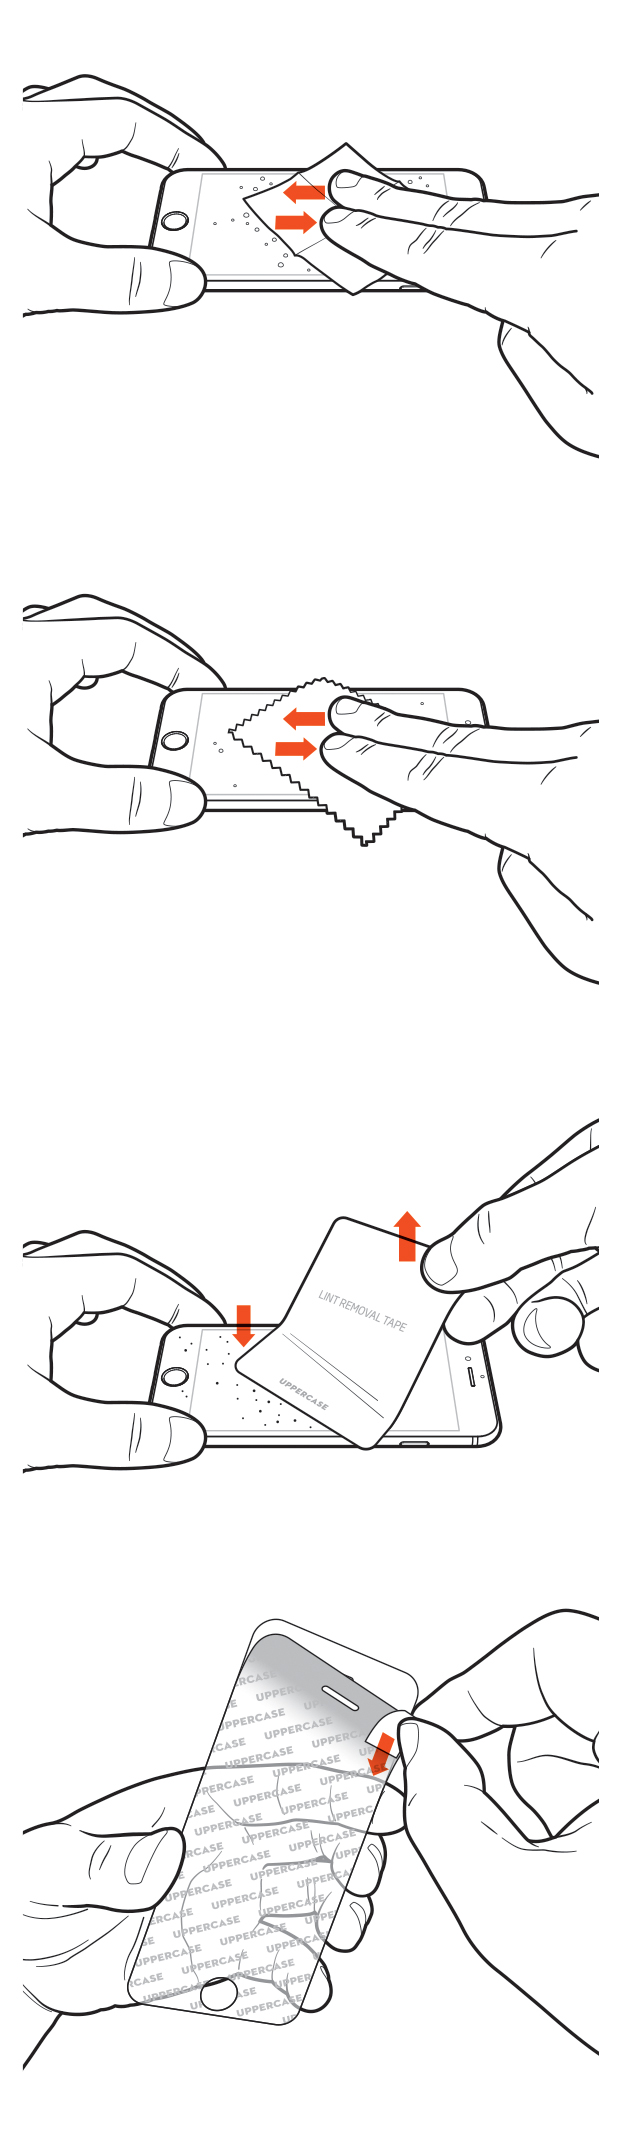 Screen Protector Installation Instructions